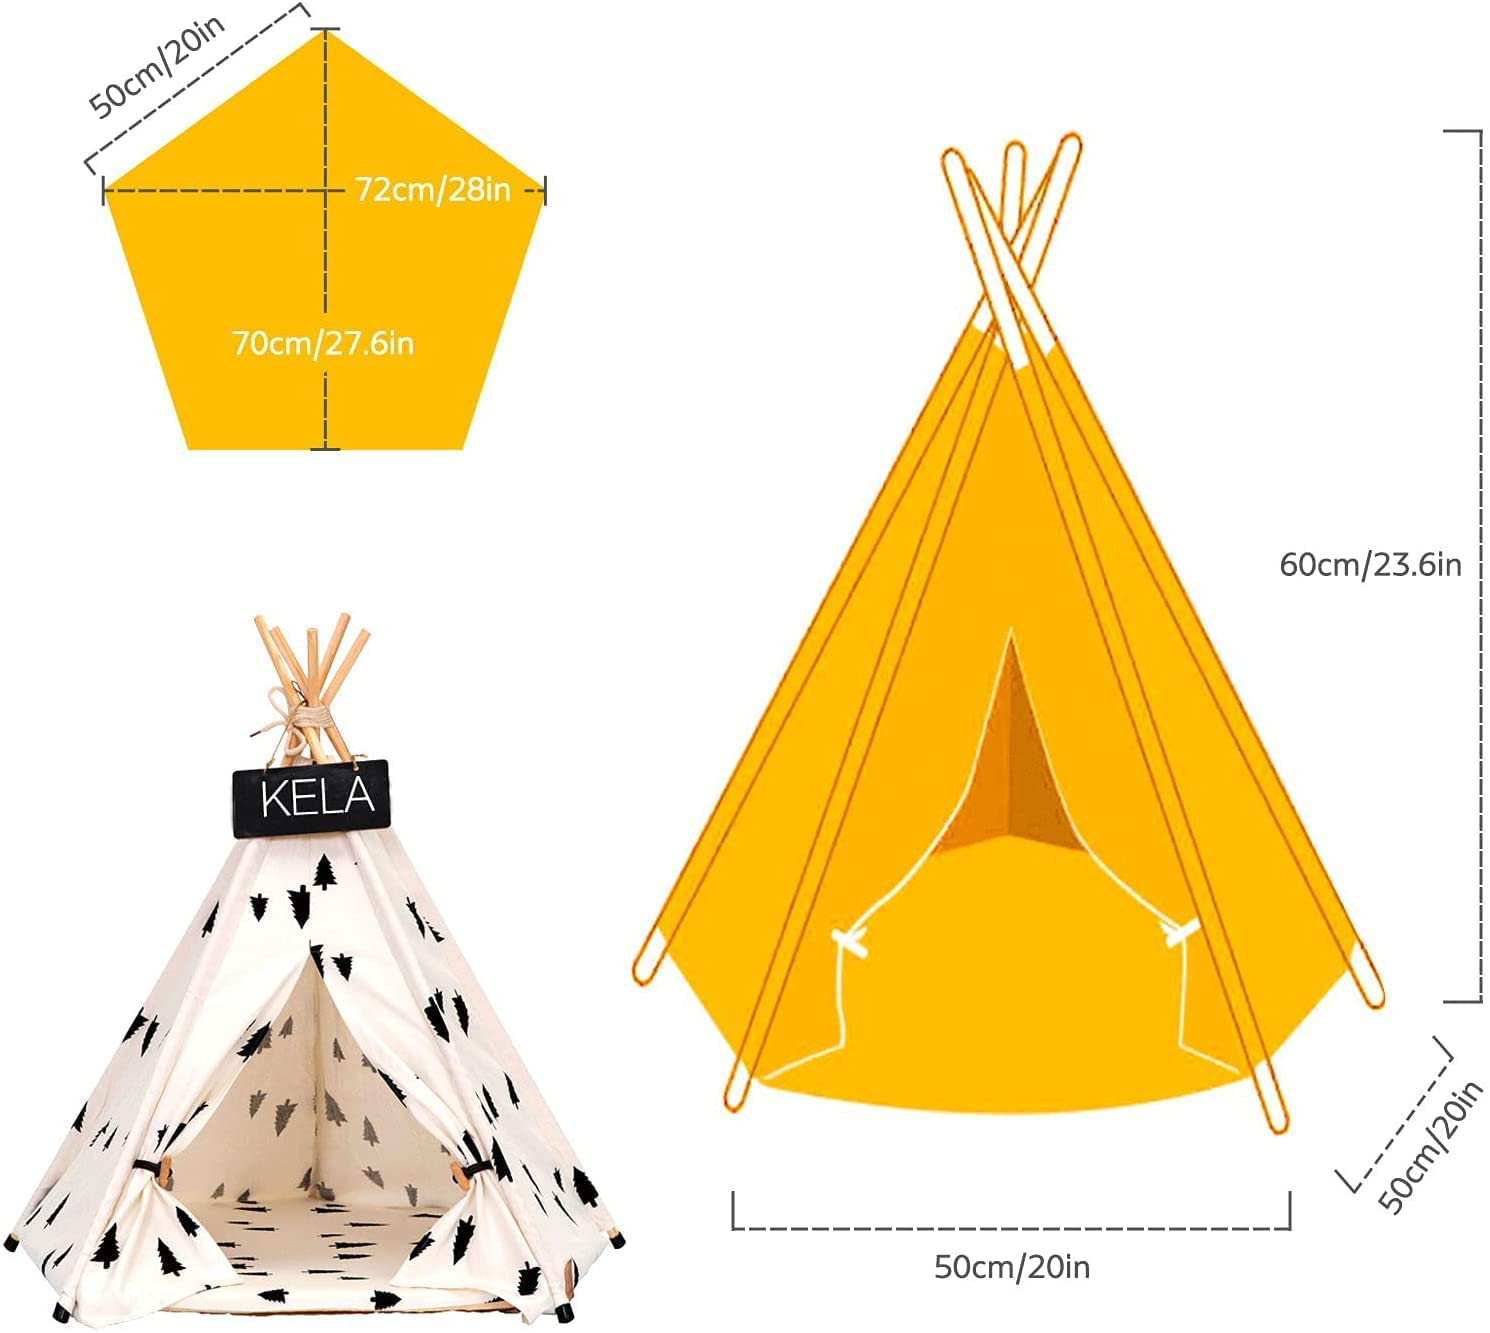 Pet Teepee Tent for Dogs, Dog Cat Teepee Bed, Portable &Washable Dog Houses Indoor Outdoor Puppy Beds for Small Dogs Cats Rabbits with Cushion and Blackboard